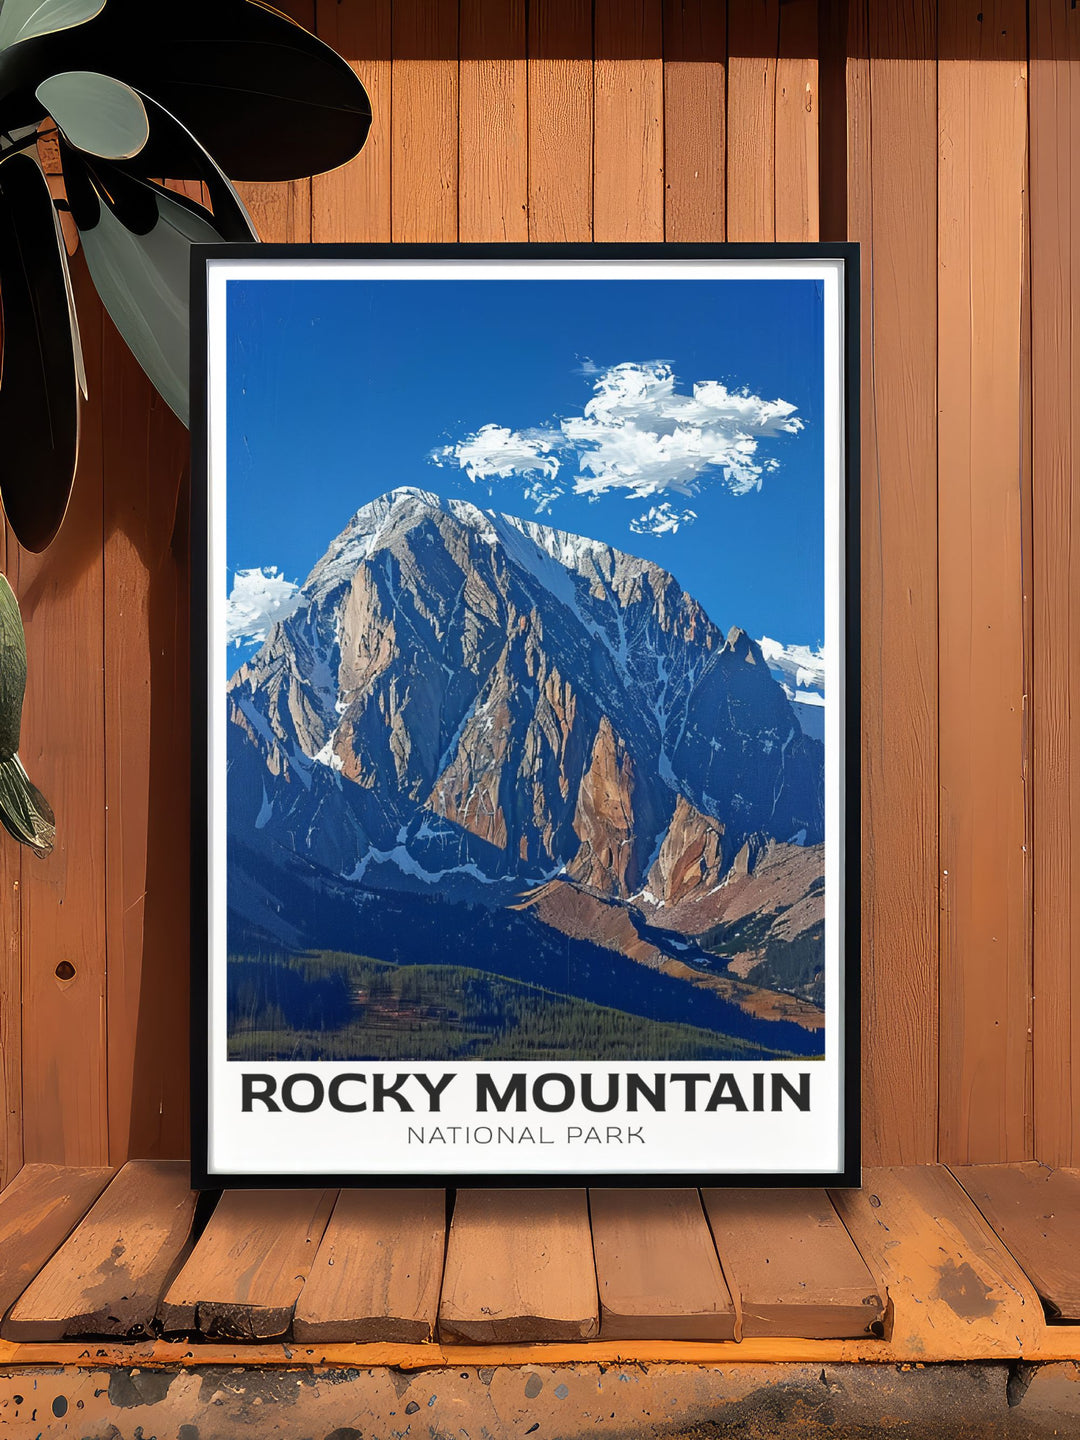 Long Peak travel poster showcasing the majestic mountain in Rocky Mountain National Park perfect for nature lovers and adventurers who appreciate the stunning beauty of the Colorado Rockies and want to add a touch of the outdoors to their home decor